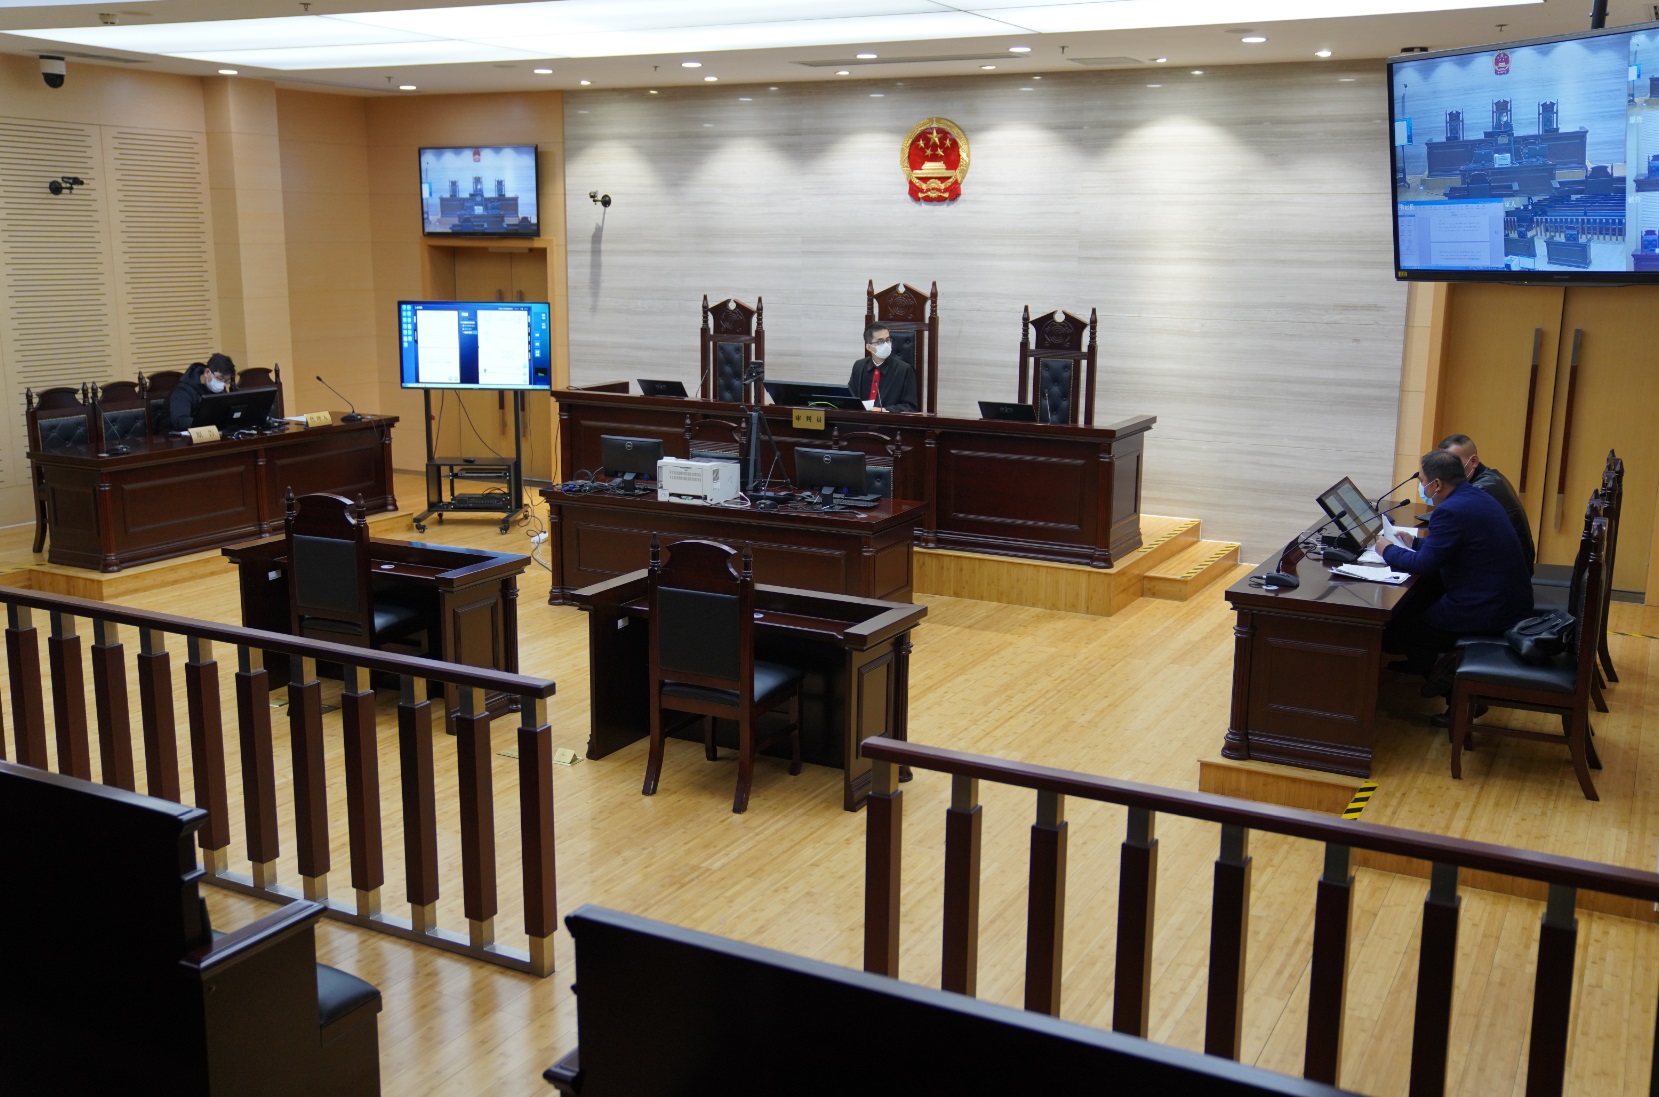 Shanghai court first explores the use of blockchain certificate technology, and 10 court trial trial record reforms started in April